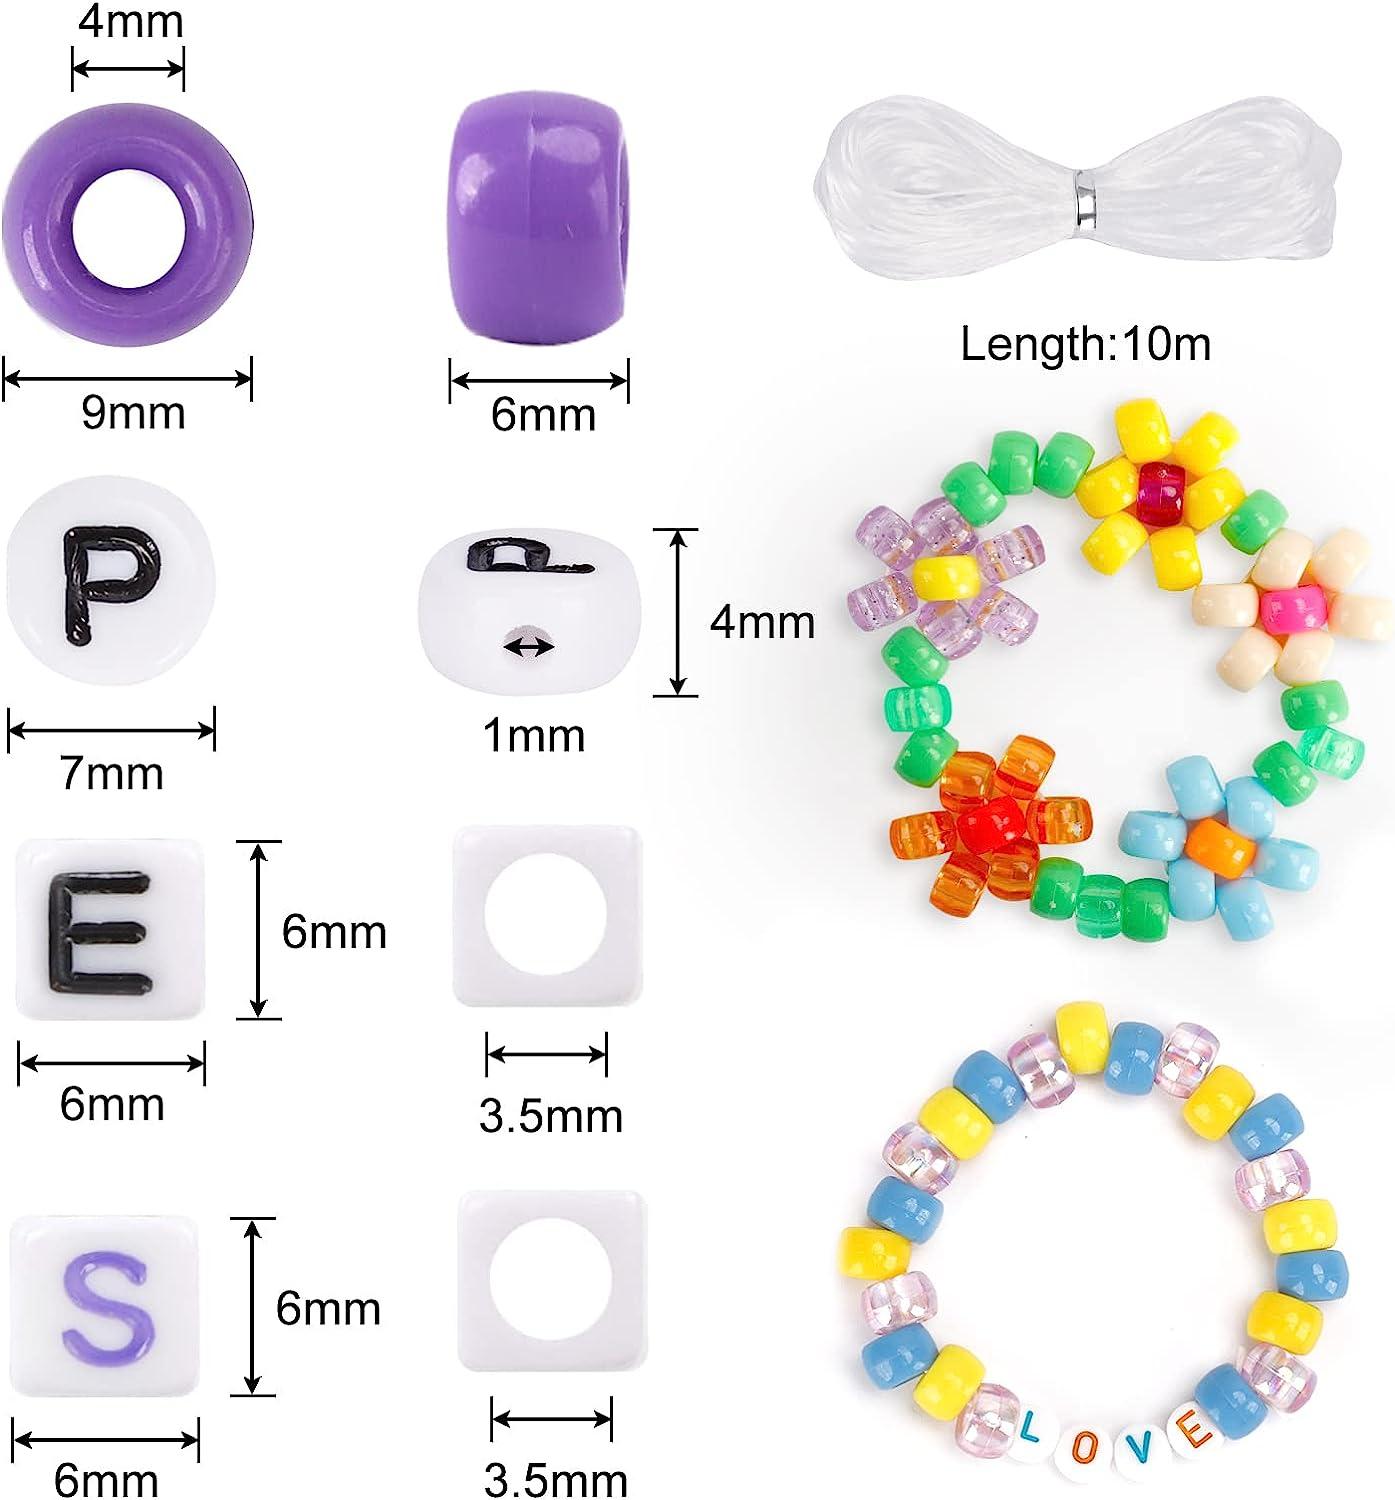 Quefe 3960pcs Pony Beads for Bracelet Making Kit 48 Colors Kandi Beads Set,  2400pcs Plastic Rainbow Bead Bulk and 1560pcs Letter Beads with 20 Meter  Elastic Threads for Craft Jewelry Necklace